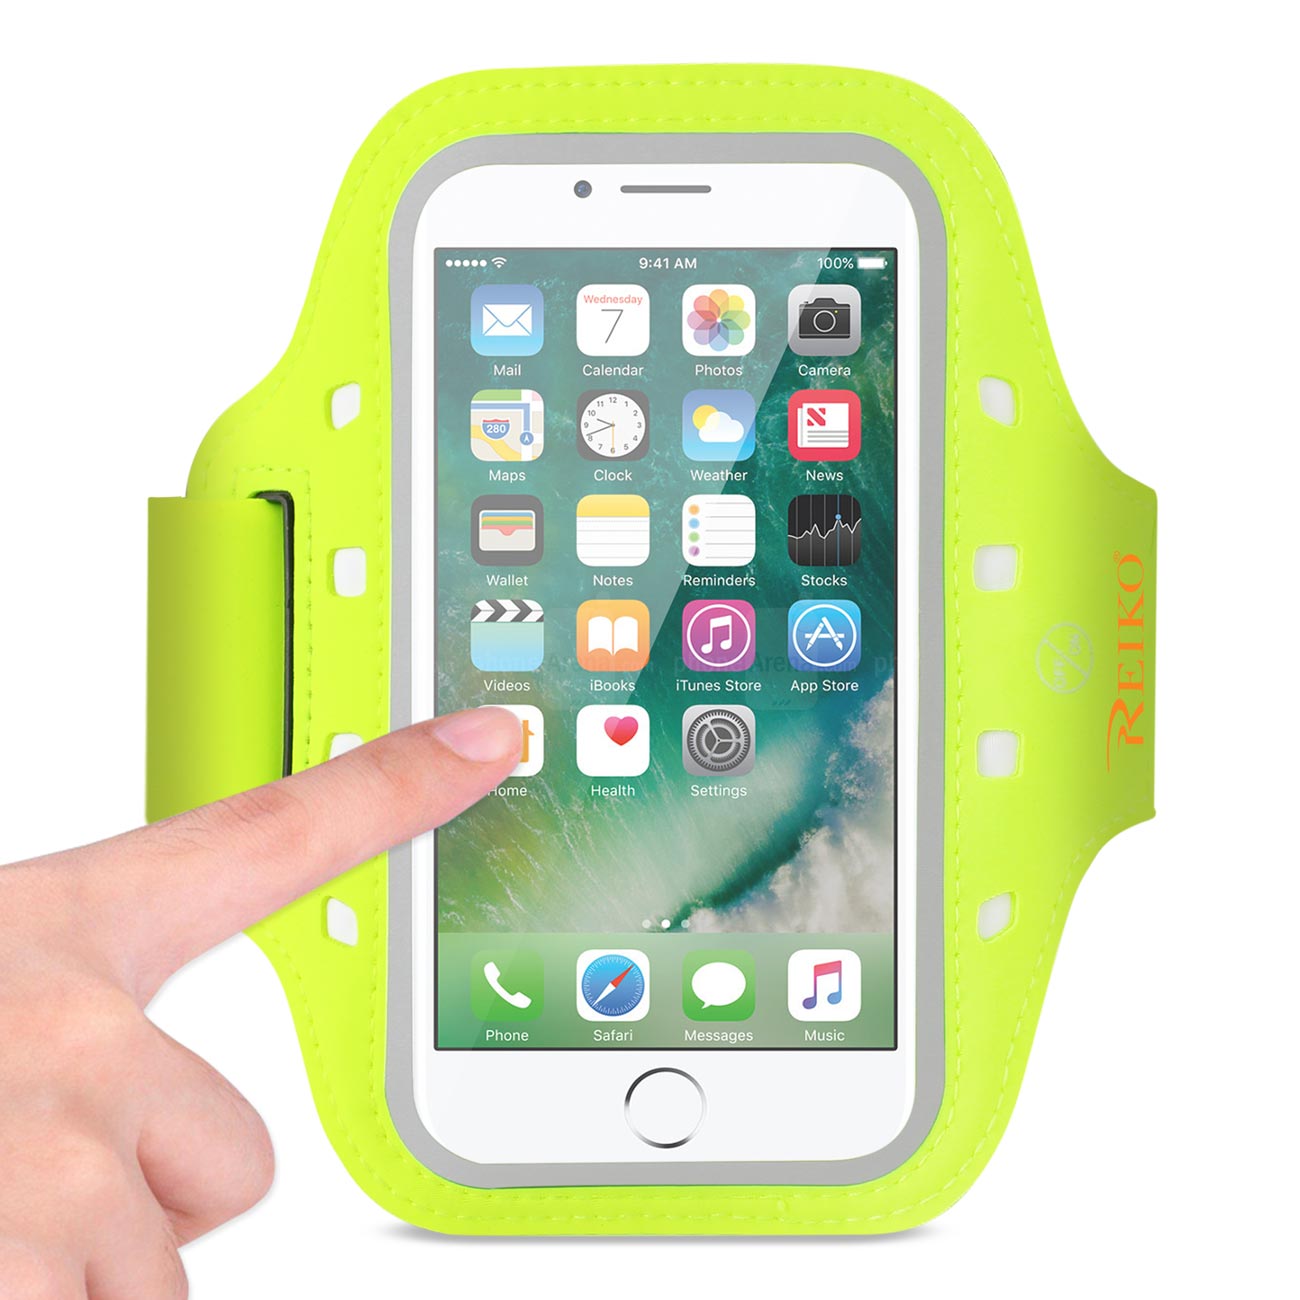 Reiko Running Sports Armband With LED Light And Touch Screen 5.5X3X 0.5 Inches Device In Green